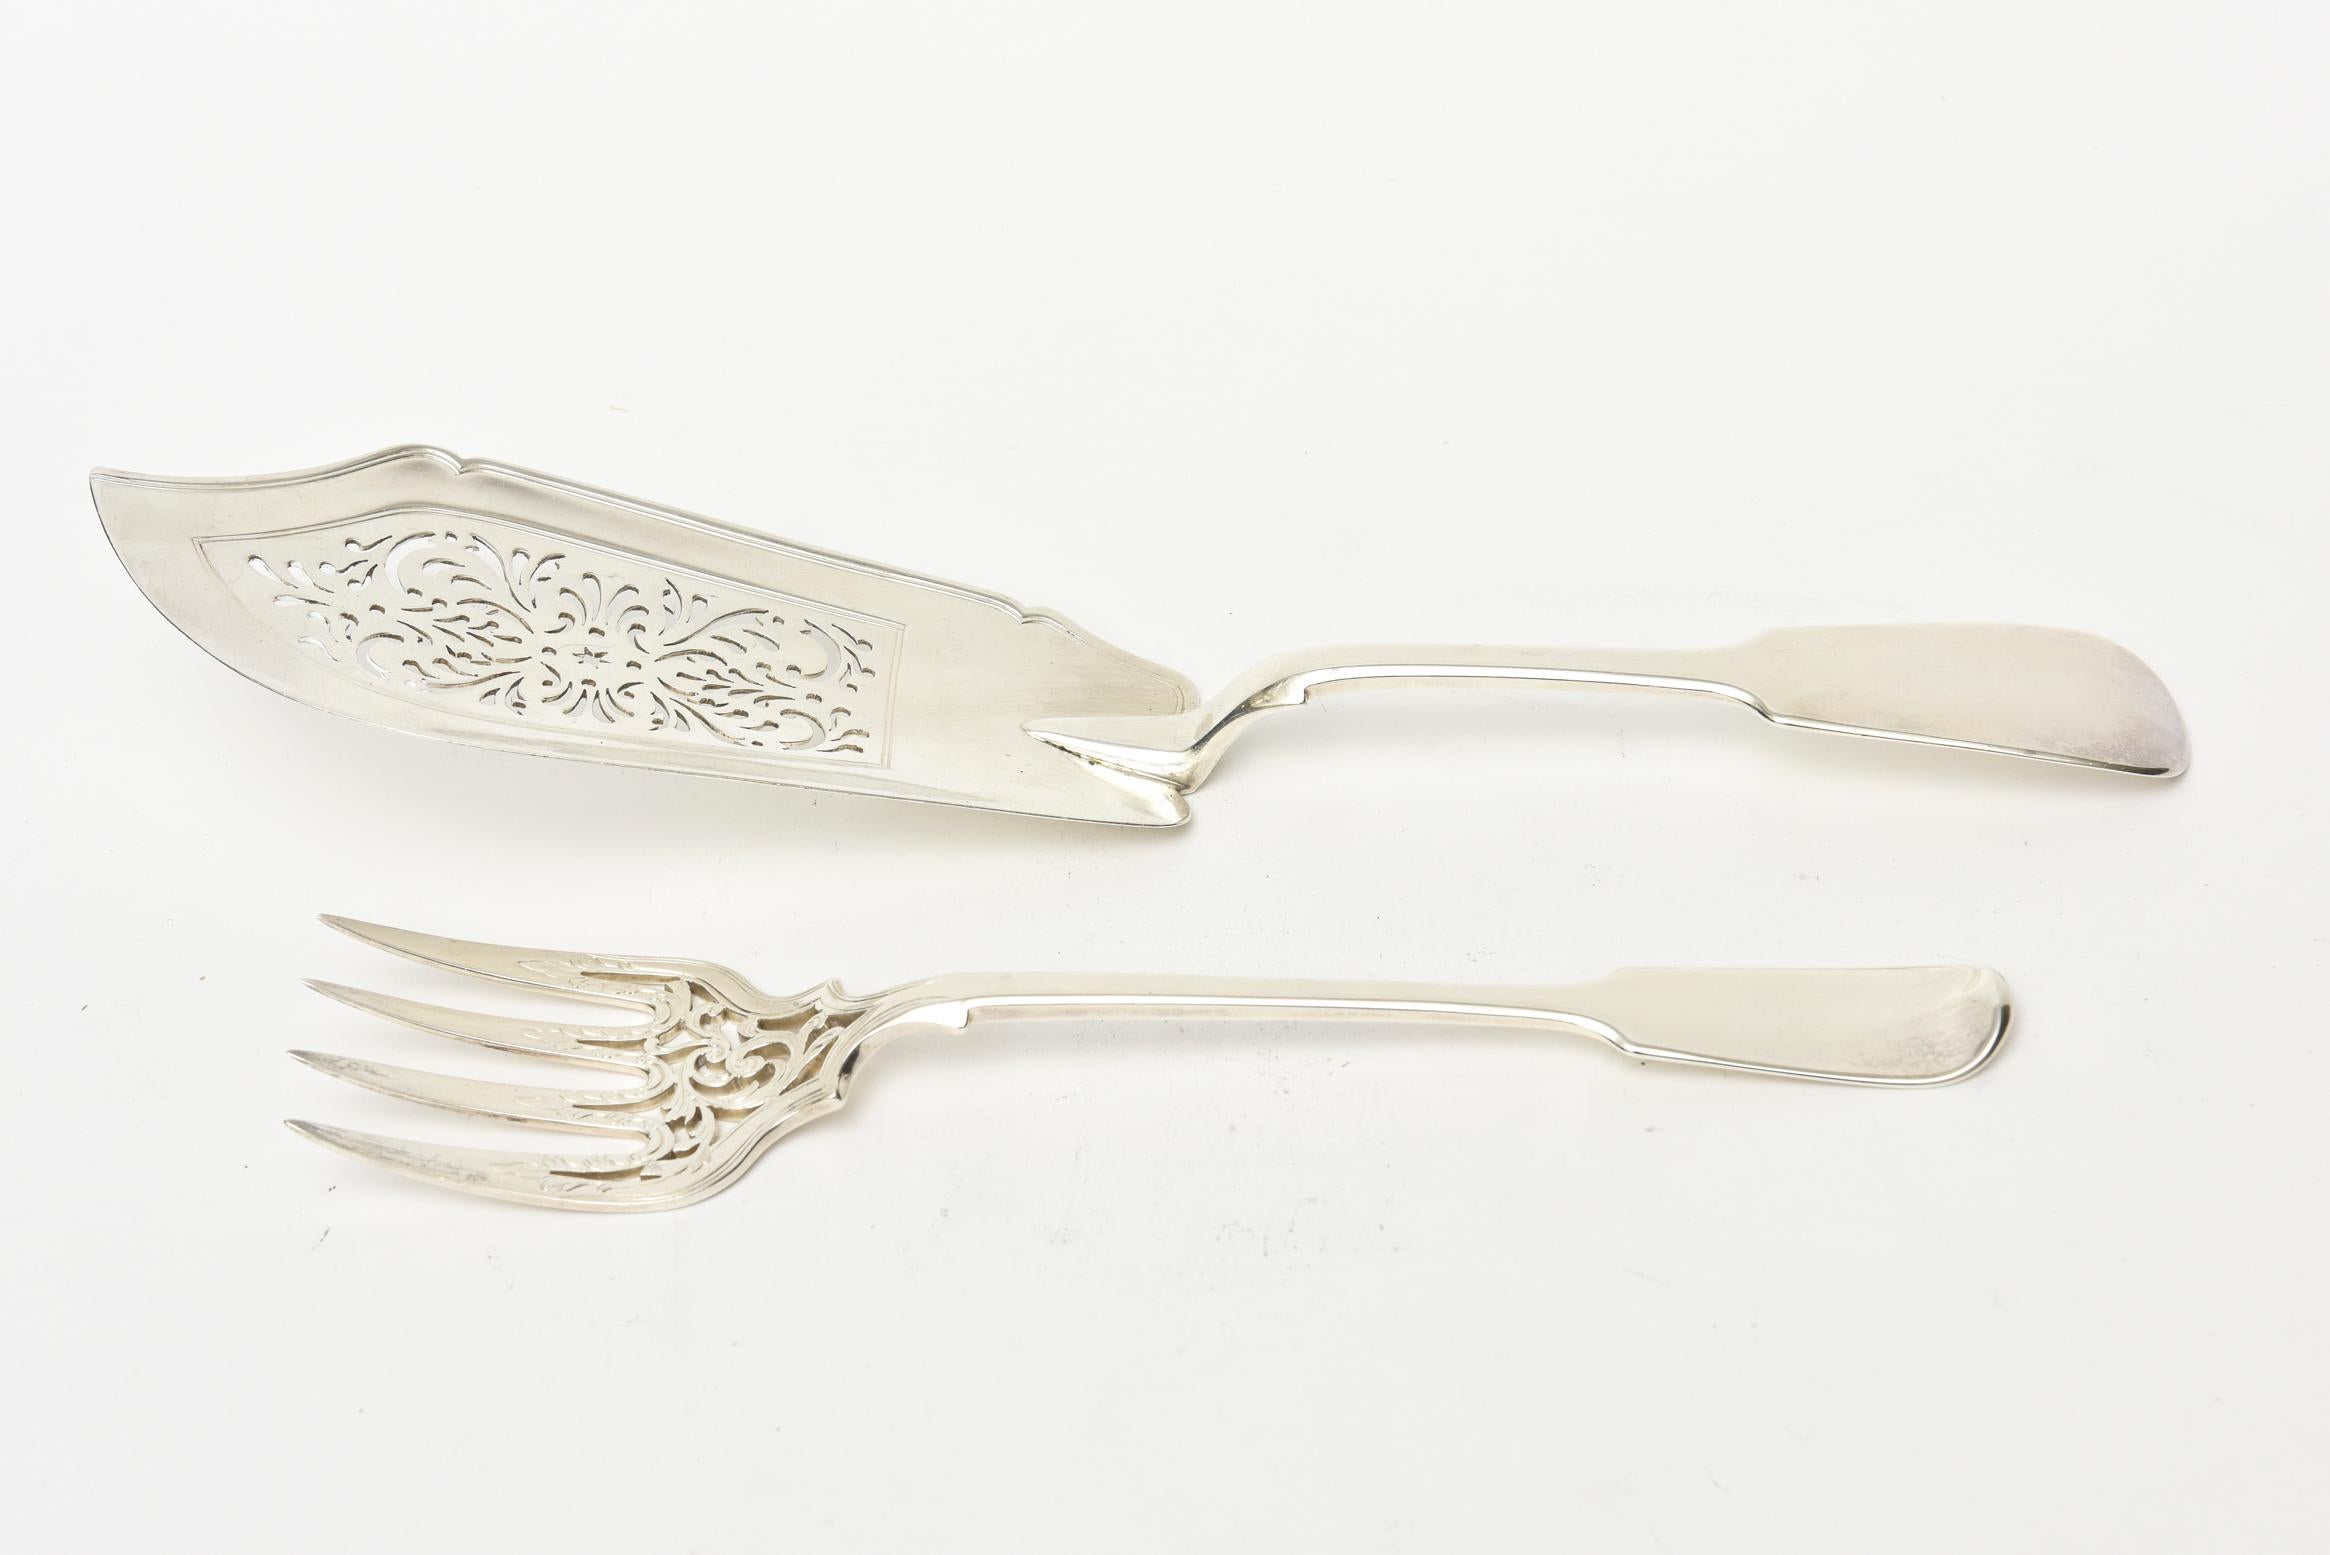 This early Victorian era sterling silver fish fork and knife serving set has multiple hallmarks. This is perfect for all your serving and entertaining needs in style and elegance. It is tooled with designs of early patterns. It does have the